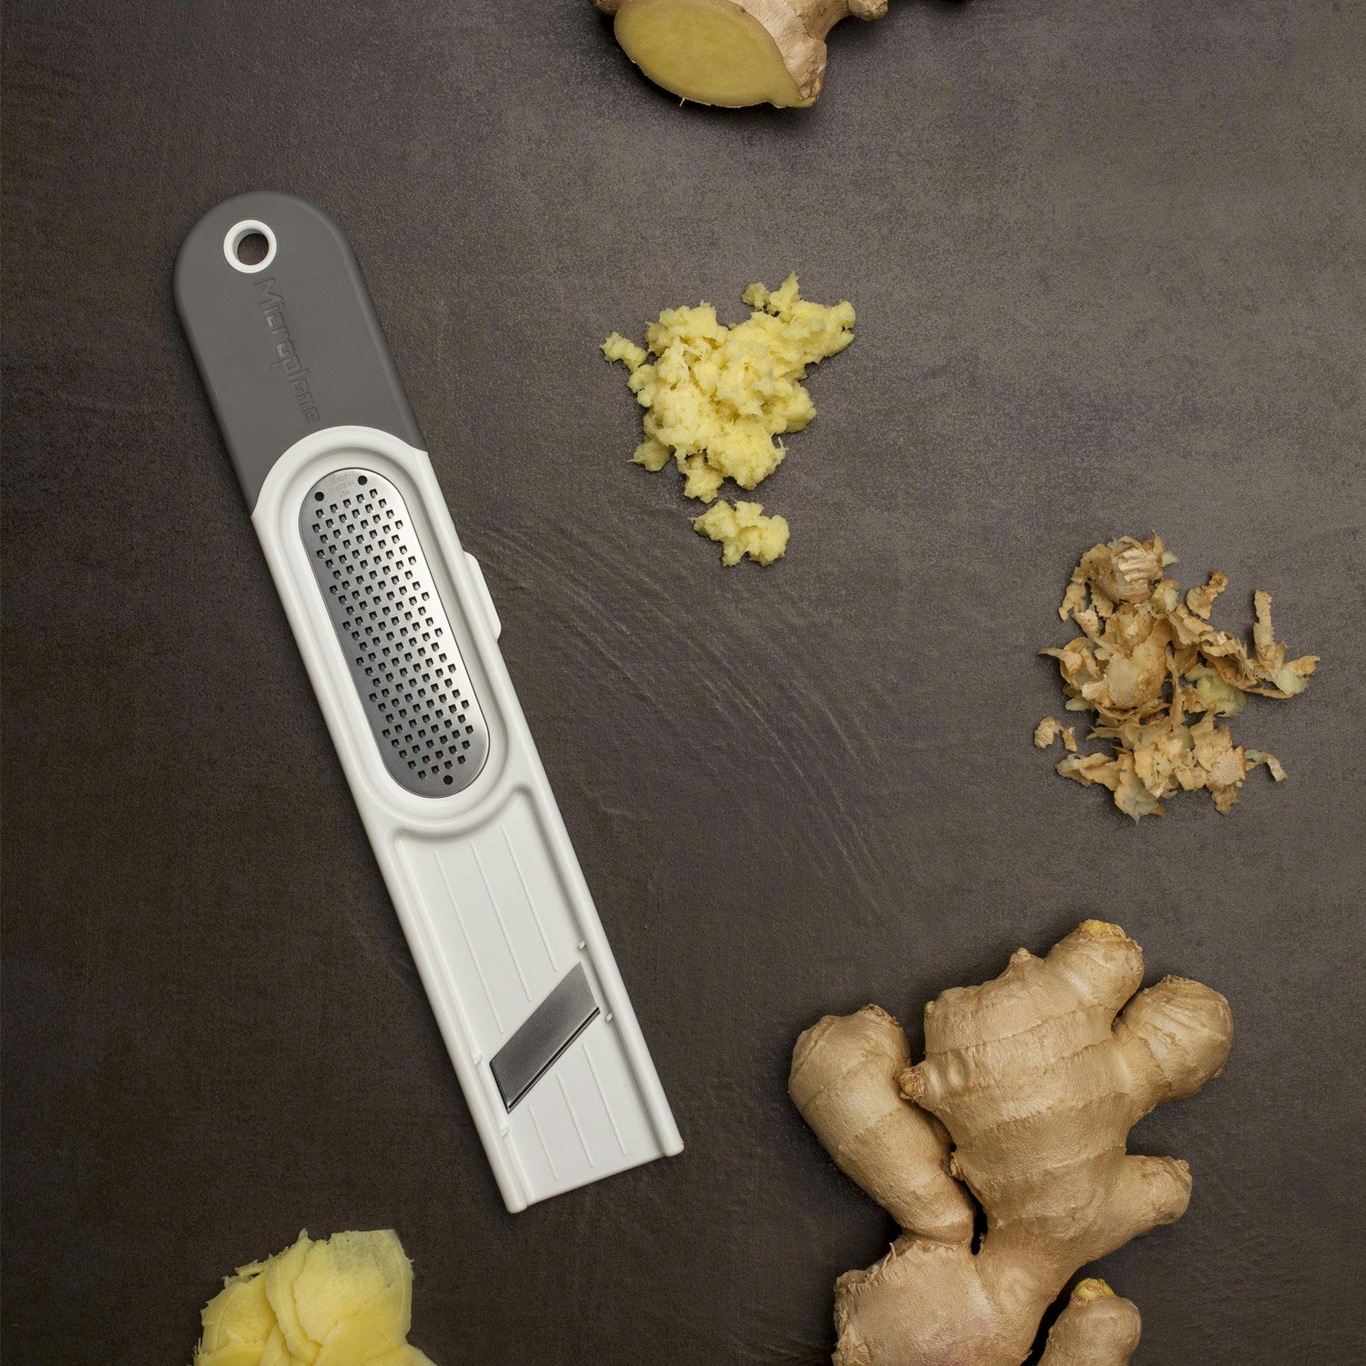 https://royaldesign.com/image/2/microplane-grater-ginger-3-in-1-2?w=800&quality=80